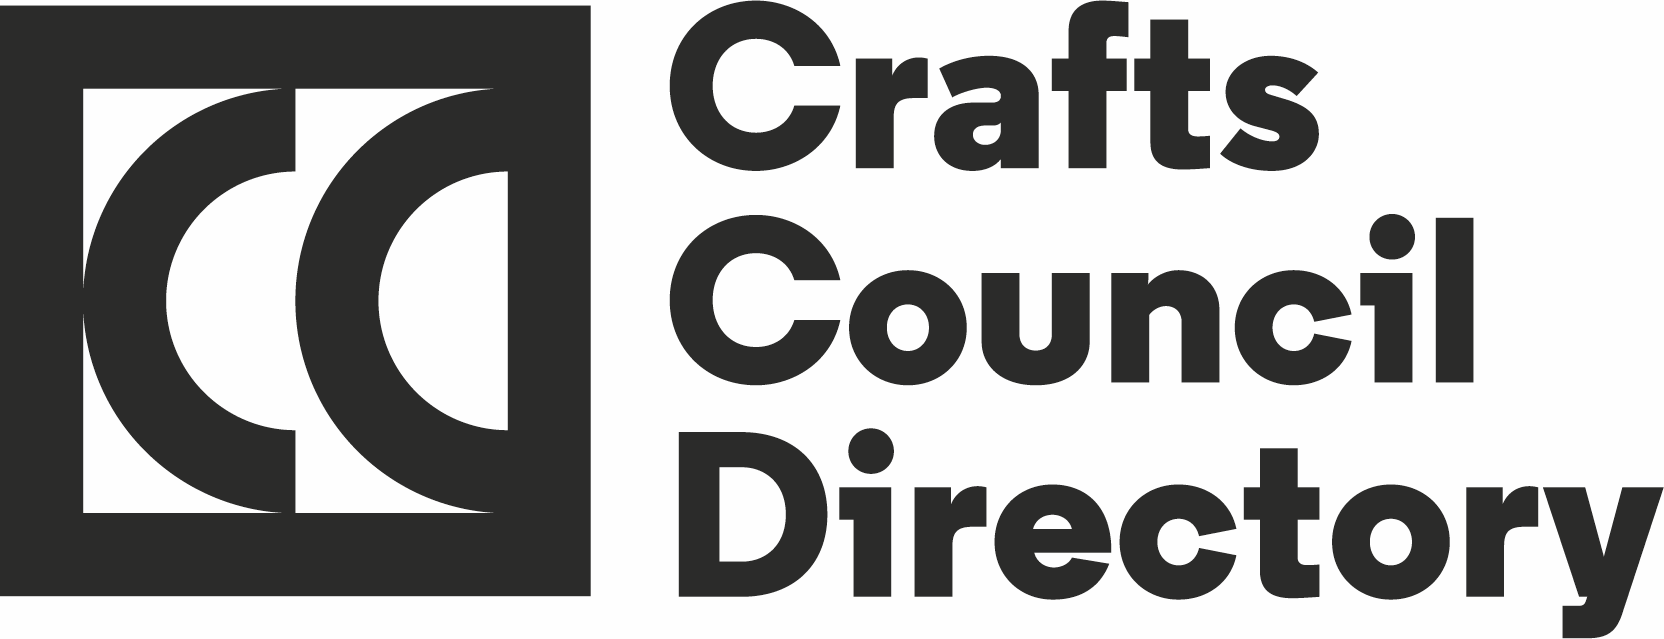 Crafts Council Directory